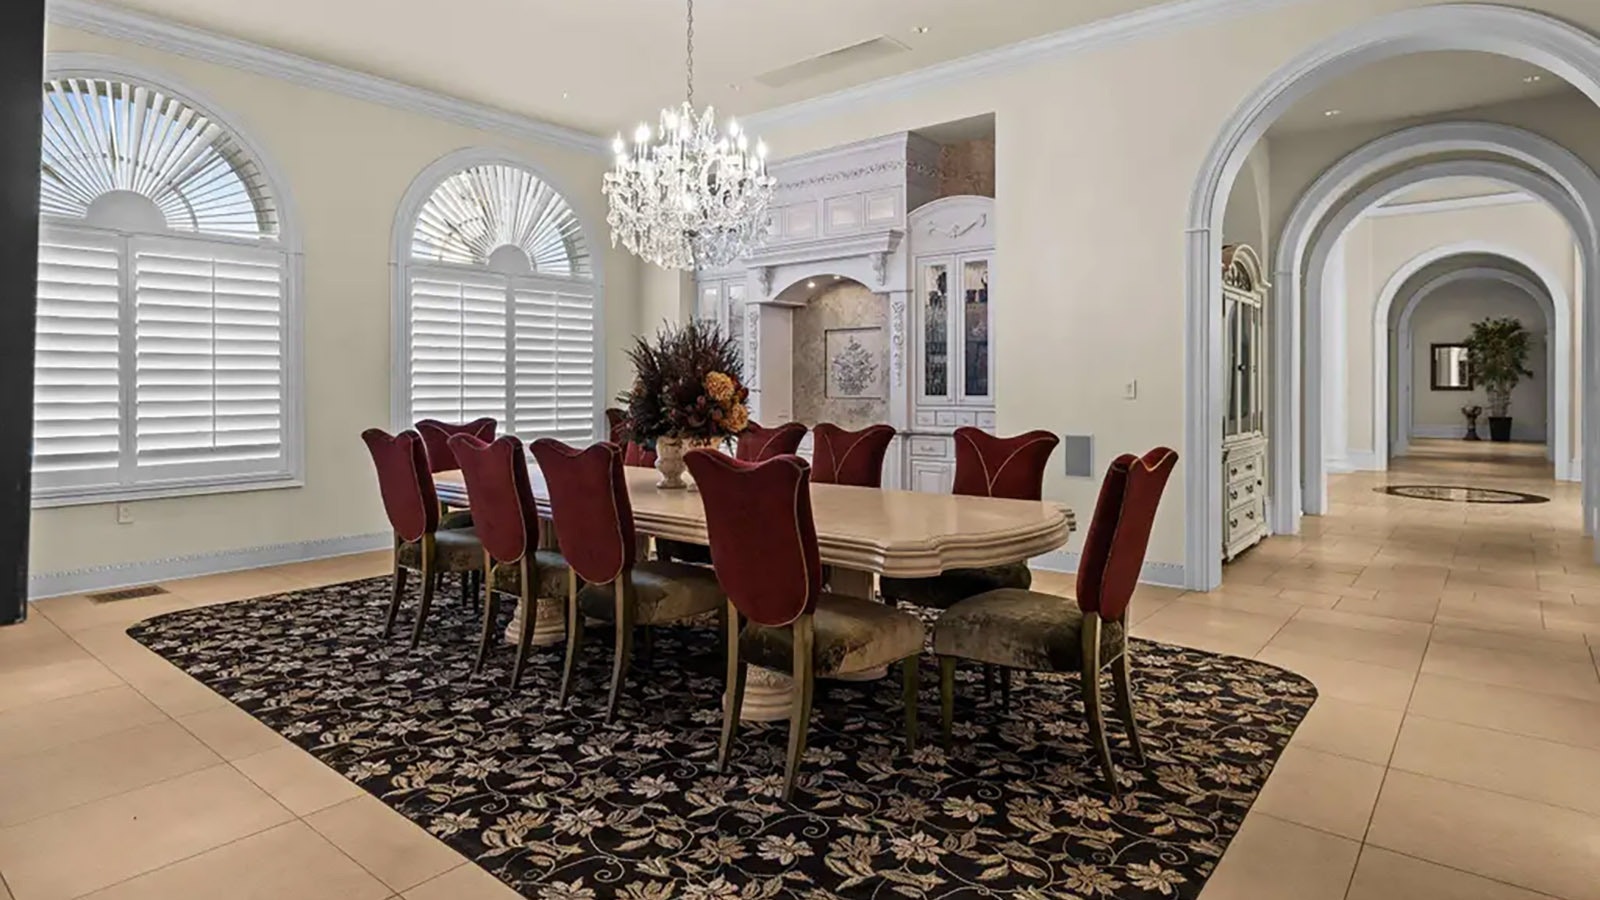 The large dining room can seat at least 10 with plenty of space left over.